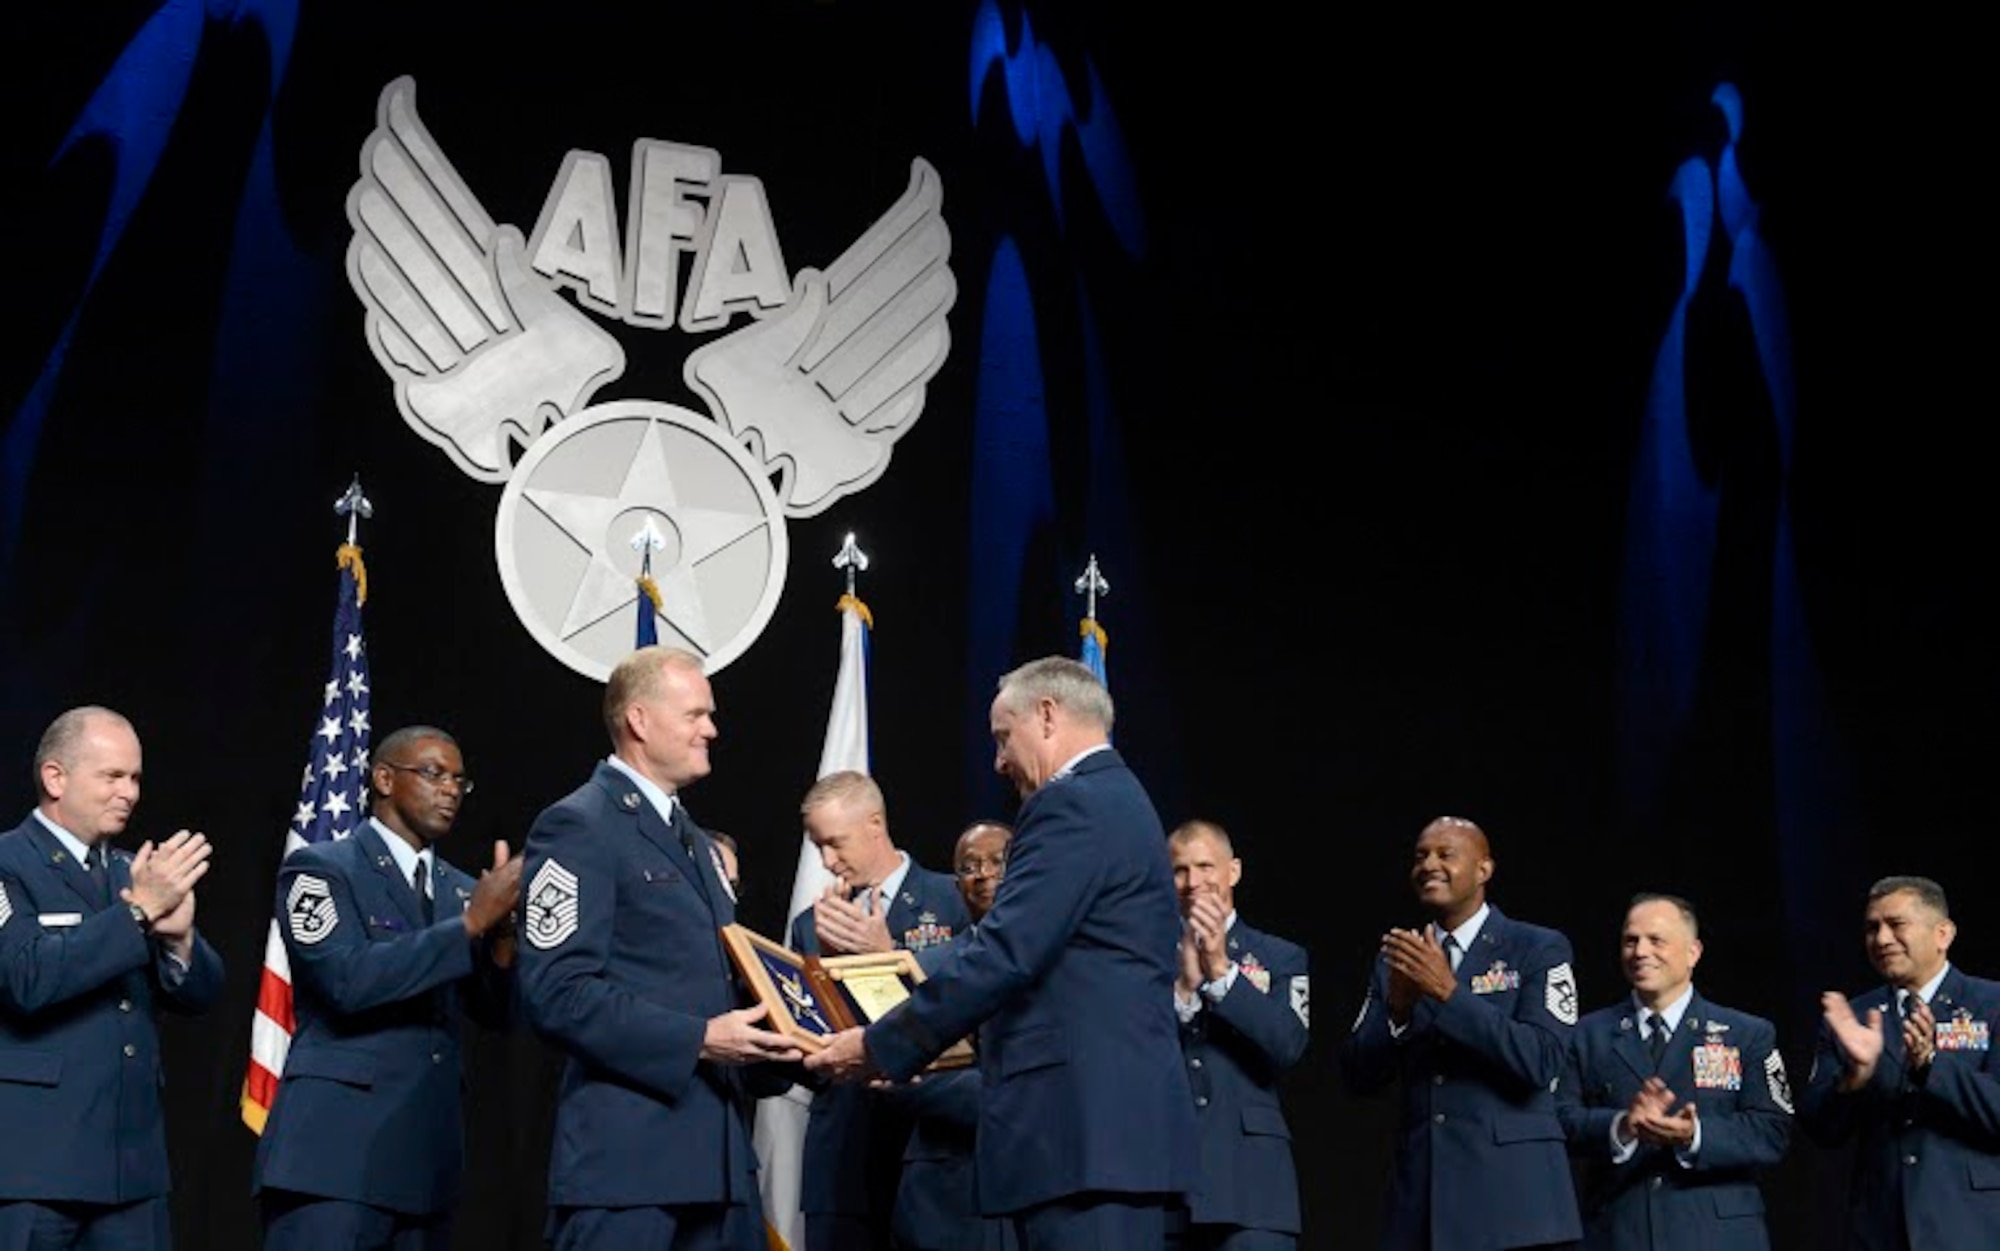 Chief Master Sgt. of the Air Force James A. Cody thanks Air Force Chief of Staff Gen. Mark A. Welsh III for his exceptional service by presenting him with an invitation to an Order of the Sword ceremony, following his "Enlisted Force Update" at the Air Force Association's Air and Space Conference and Technology Exposition Sept. 16, 2015, in Washington, D.C.  (U.S. Air Force photo/Scott M. Ash)